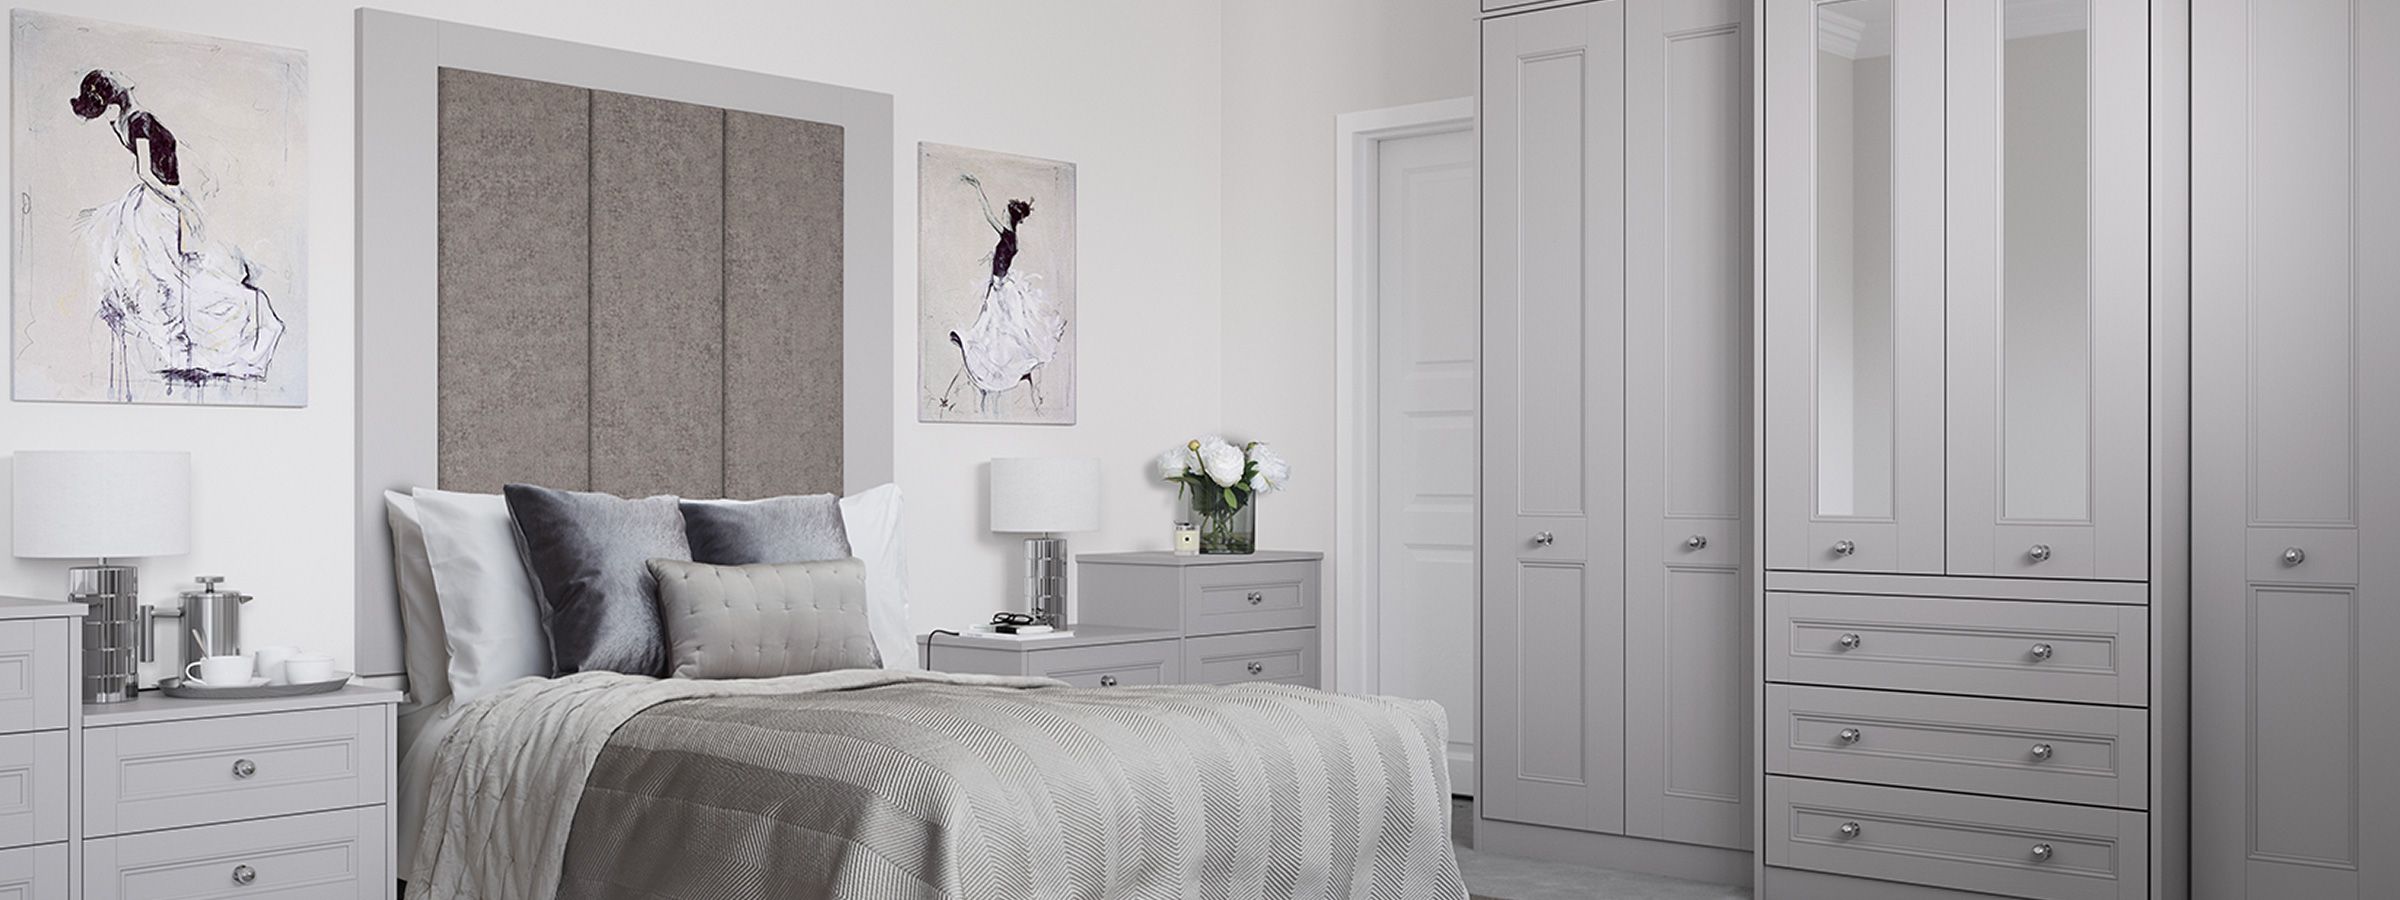 teenage fitted bedrooms